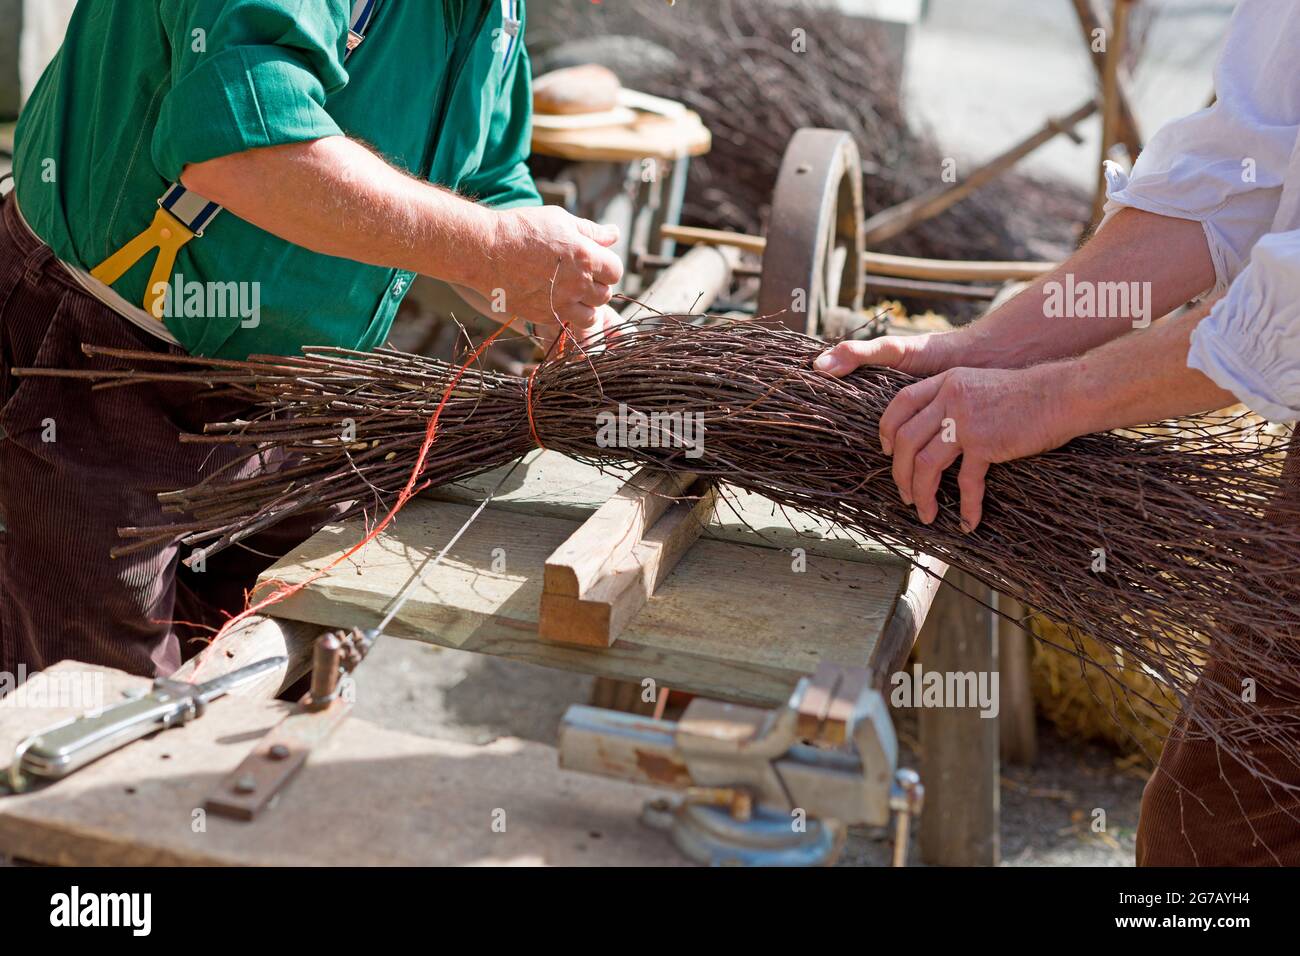 Broom maker at work, Celle, Lower Saxony, Germany Stock Photo